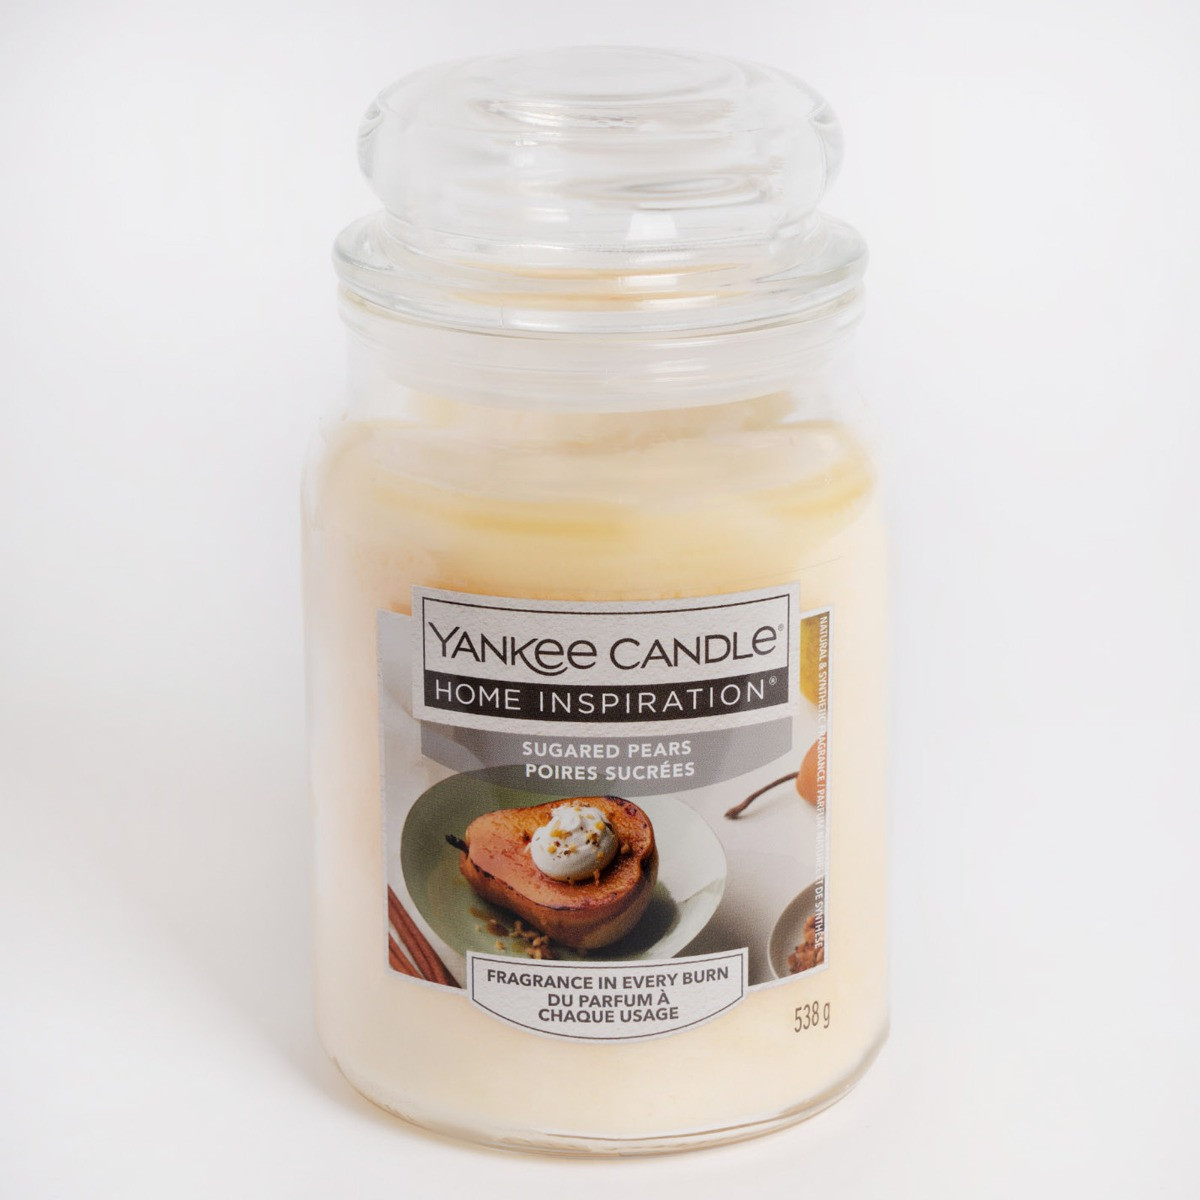 Yankee Candle Home Inspiration Large Jar - Sugared Pears>